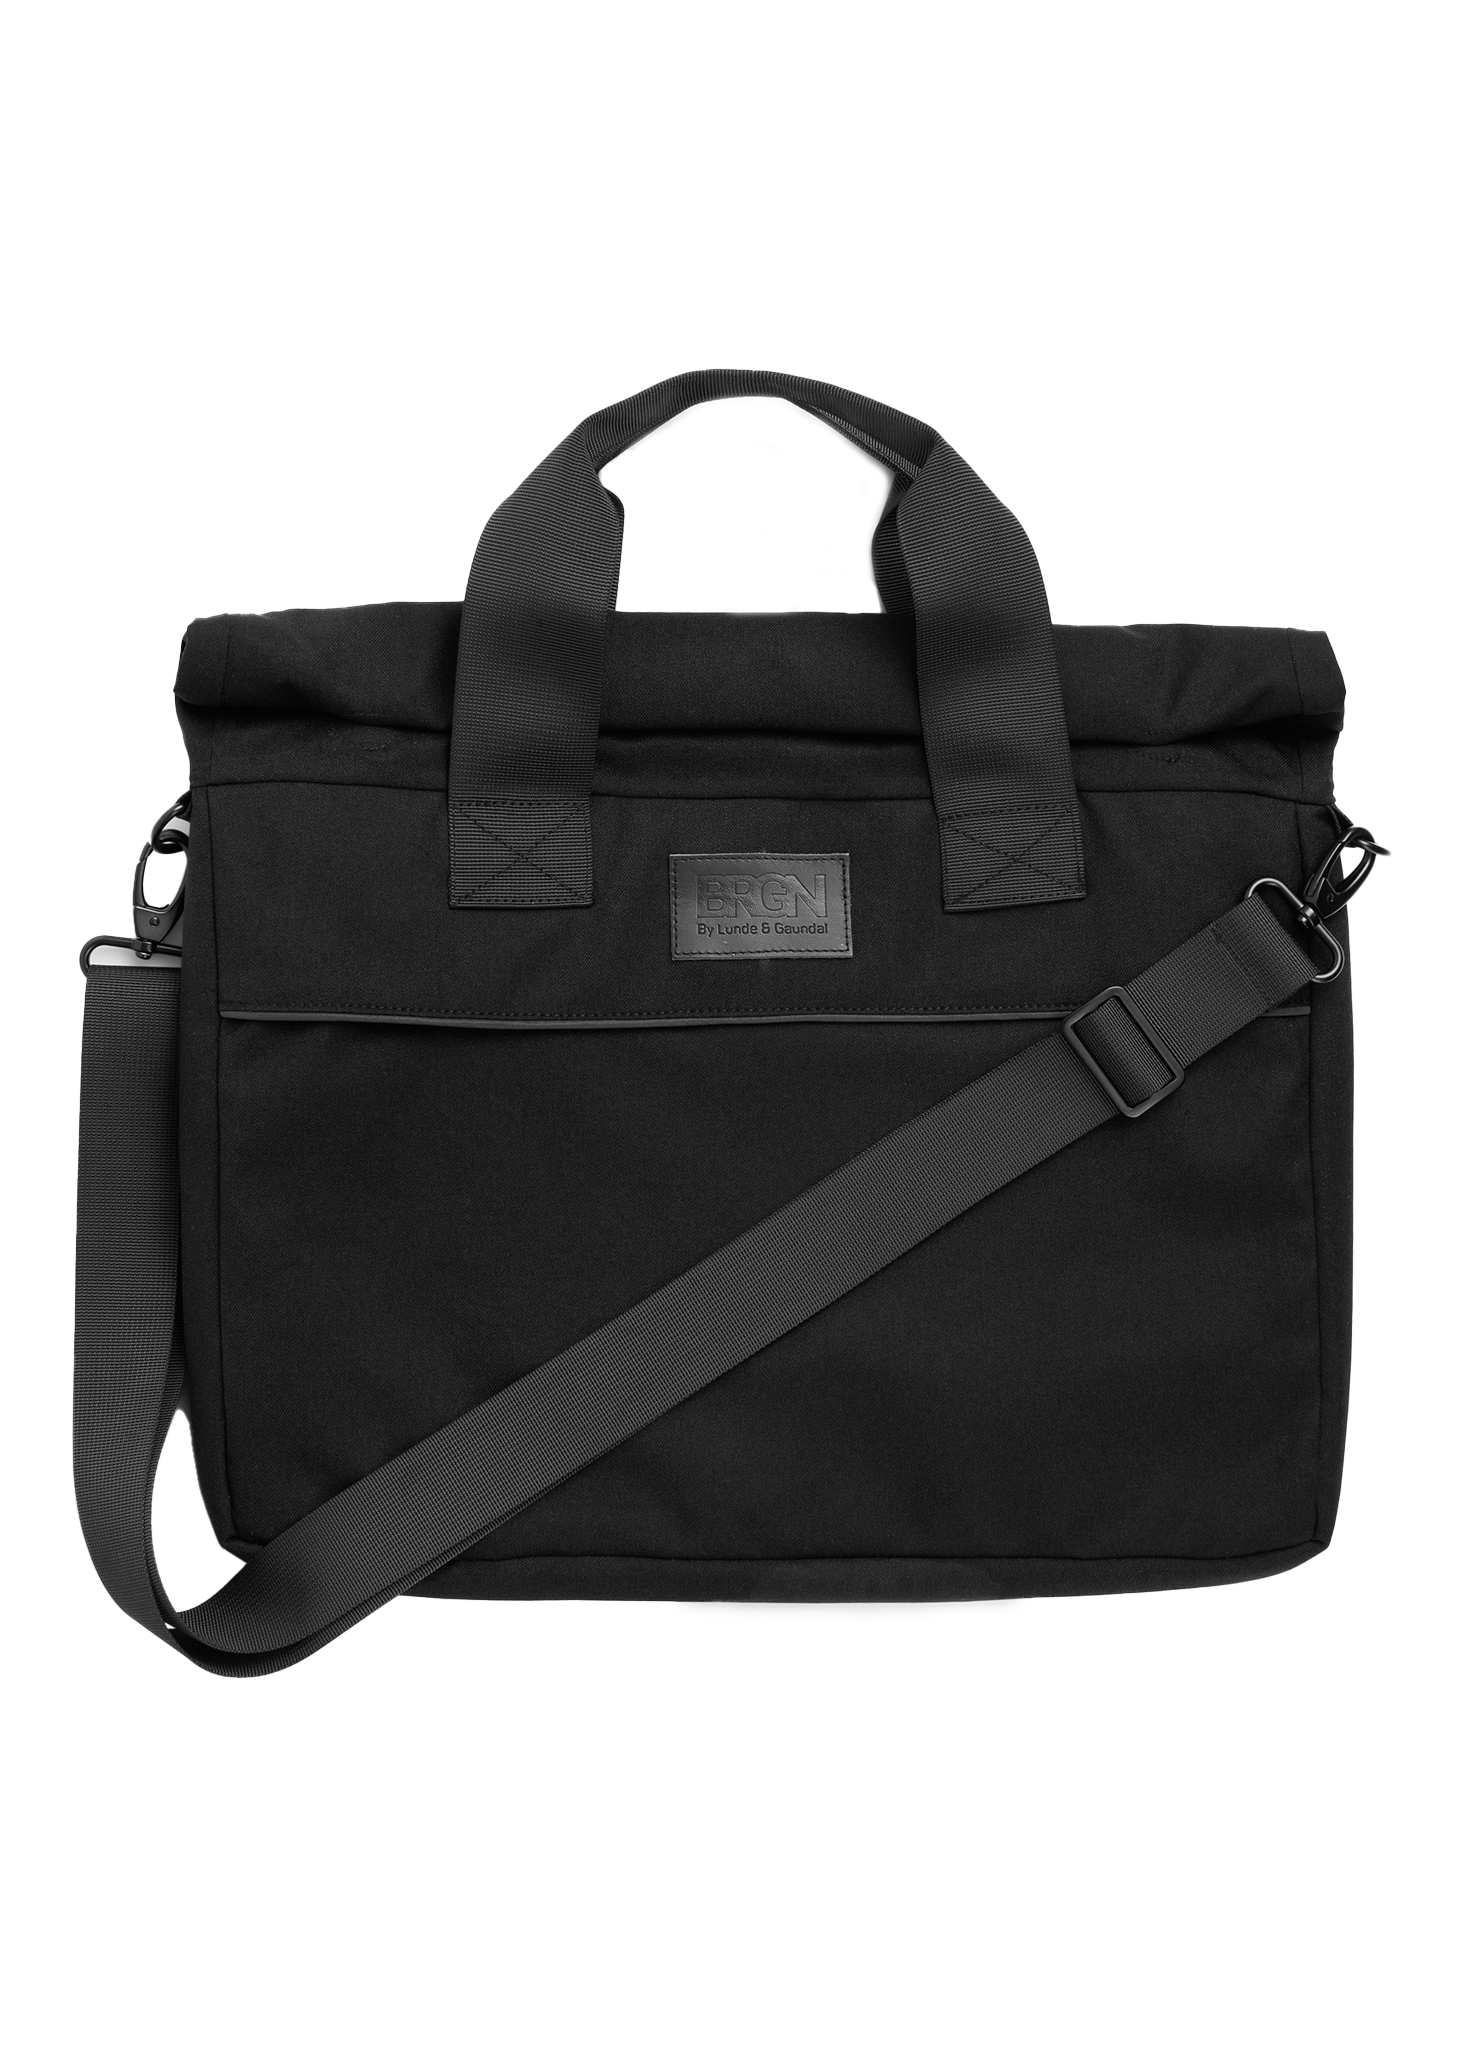 BRGN by Lunde & Gaundal Laptop bag Accessories 095 New Black